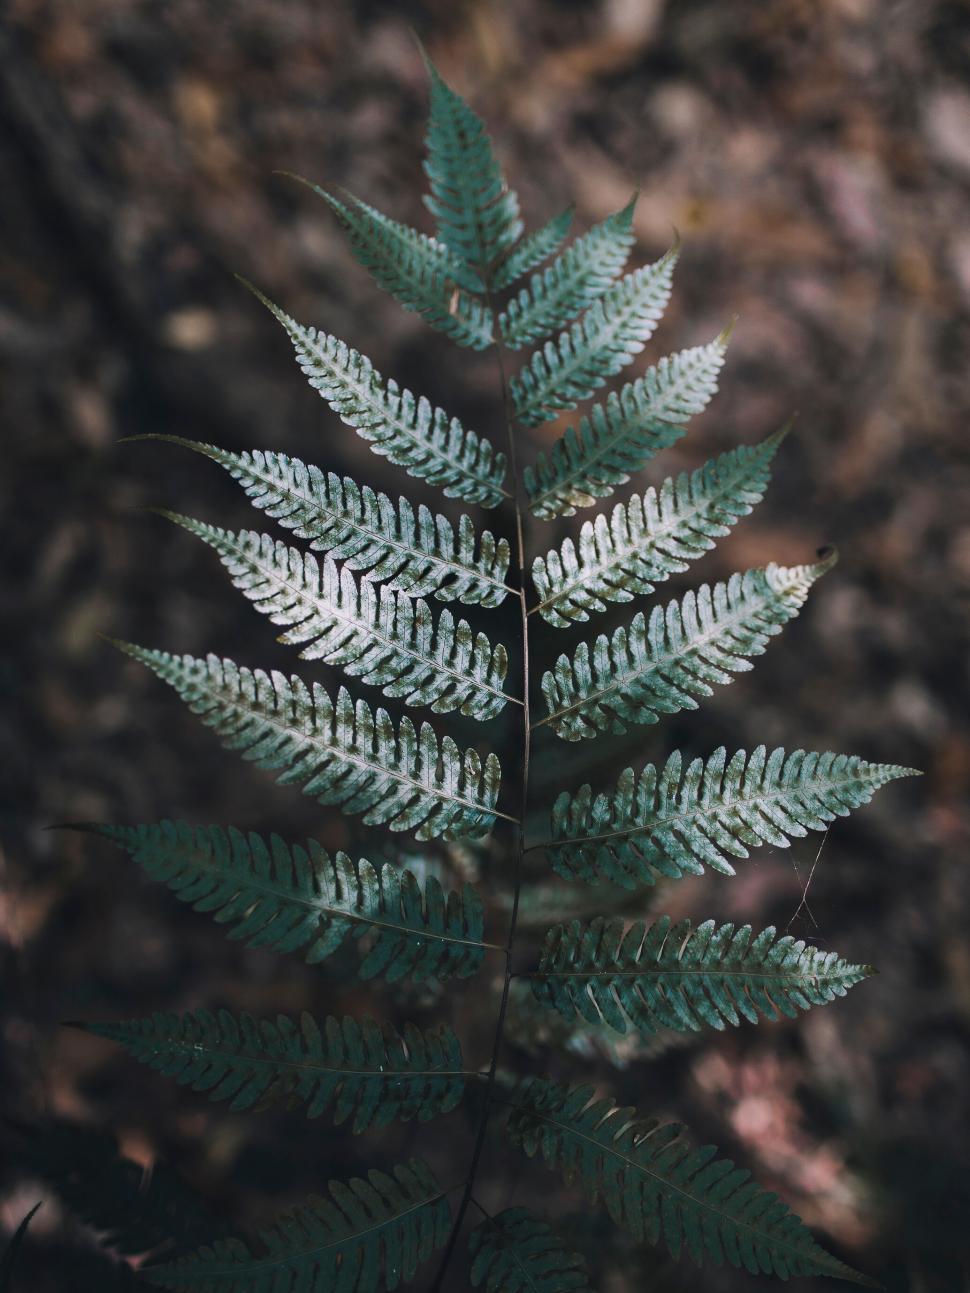 Free Image of A close up of a fern leaf 